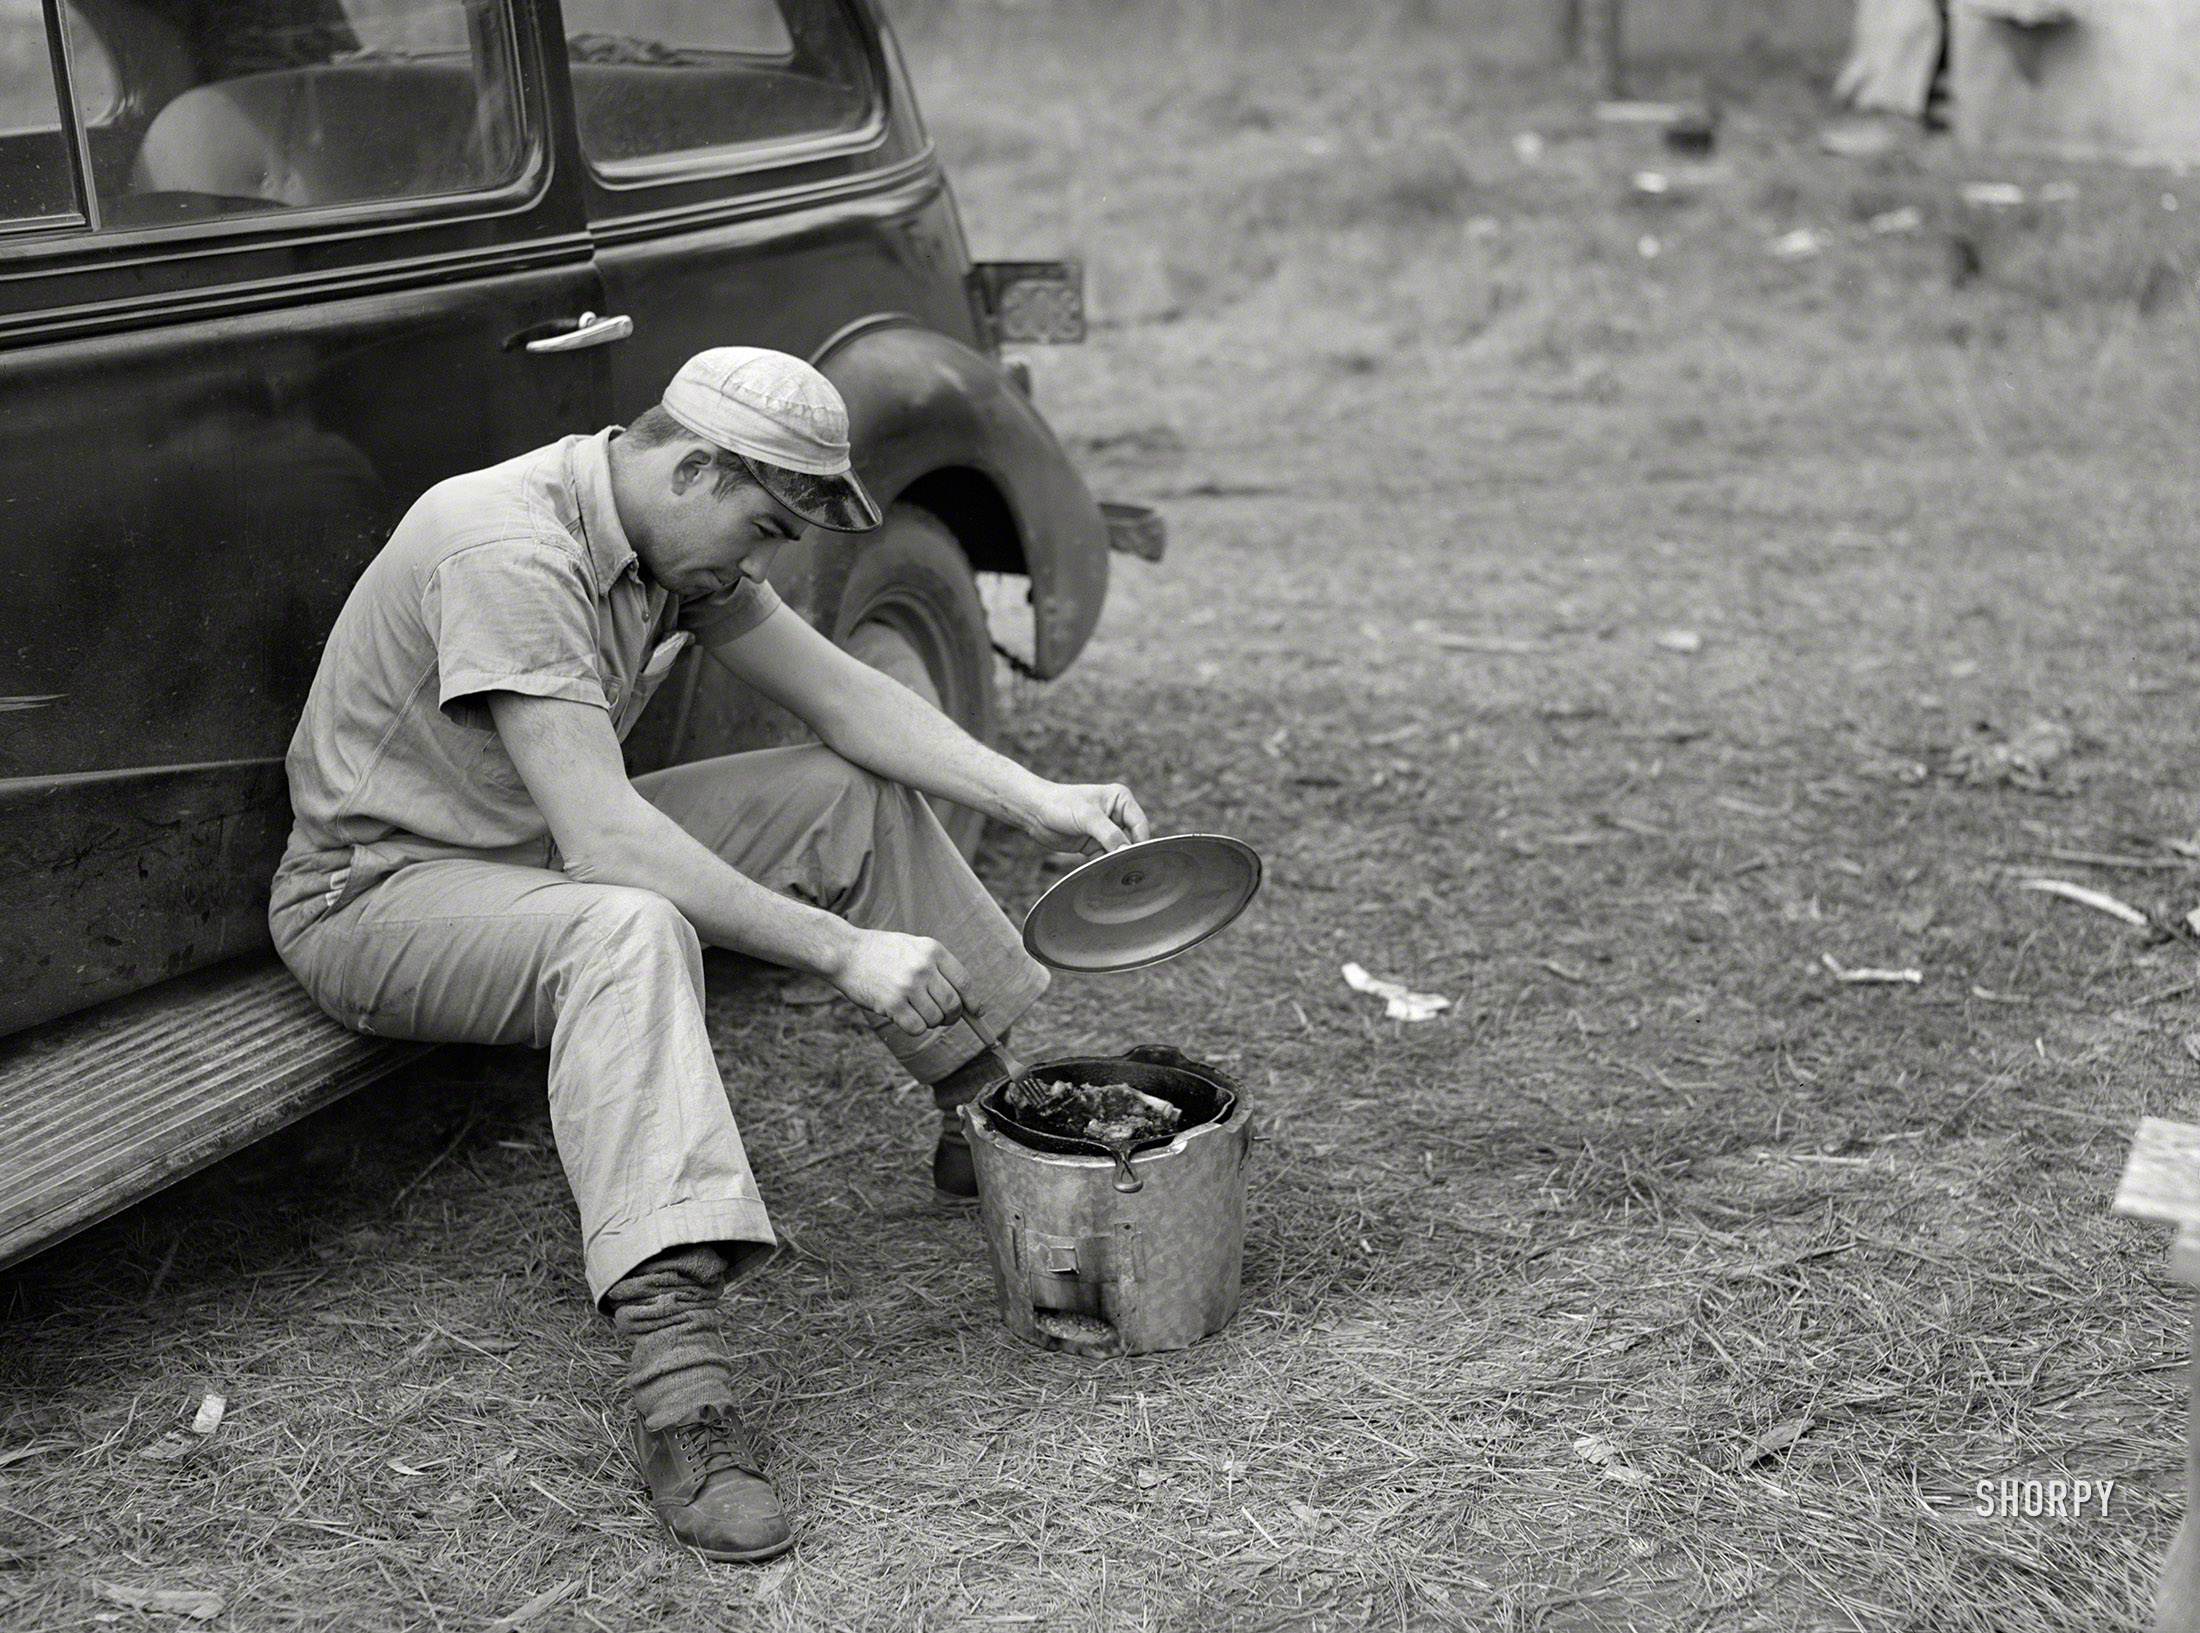 December 1940. "John H. Poole Jr. cooking while sitting on side of car. He is a carpenter on construction job at Camp Livingston. He comes from Monroe, Louisiana, where he has an electrical shop." Medium format negative by Marion Post Wolcott. View full size.